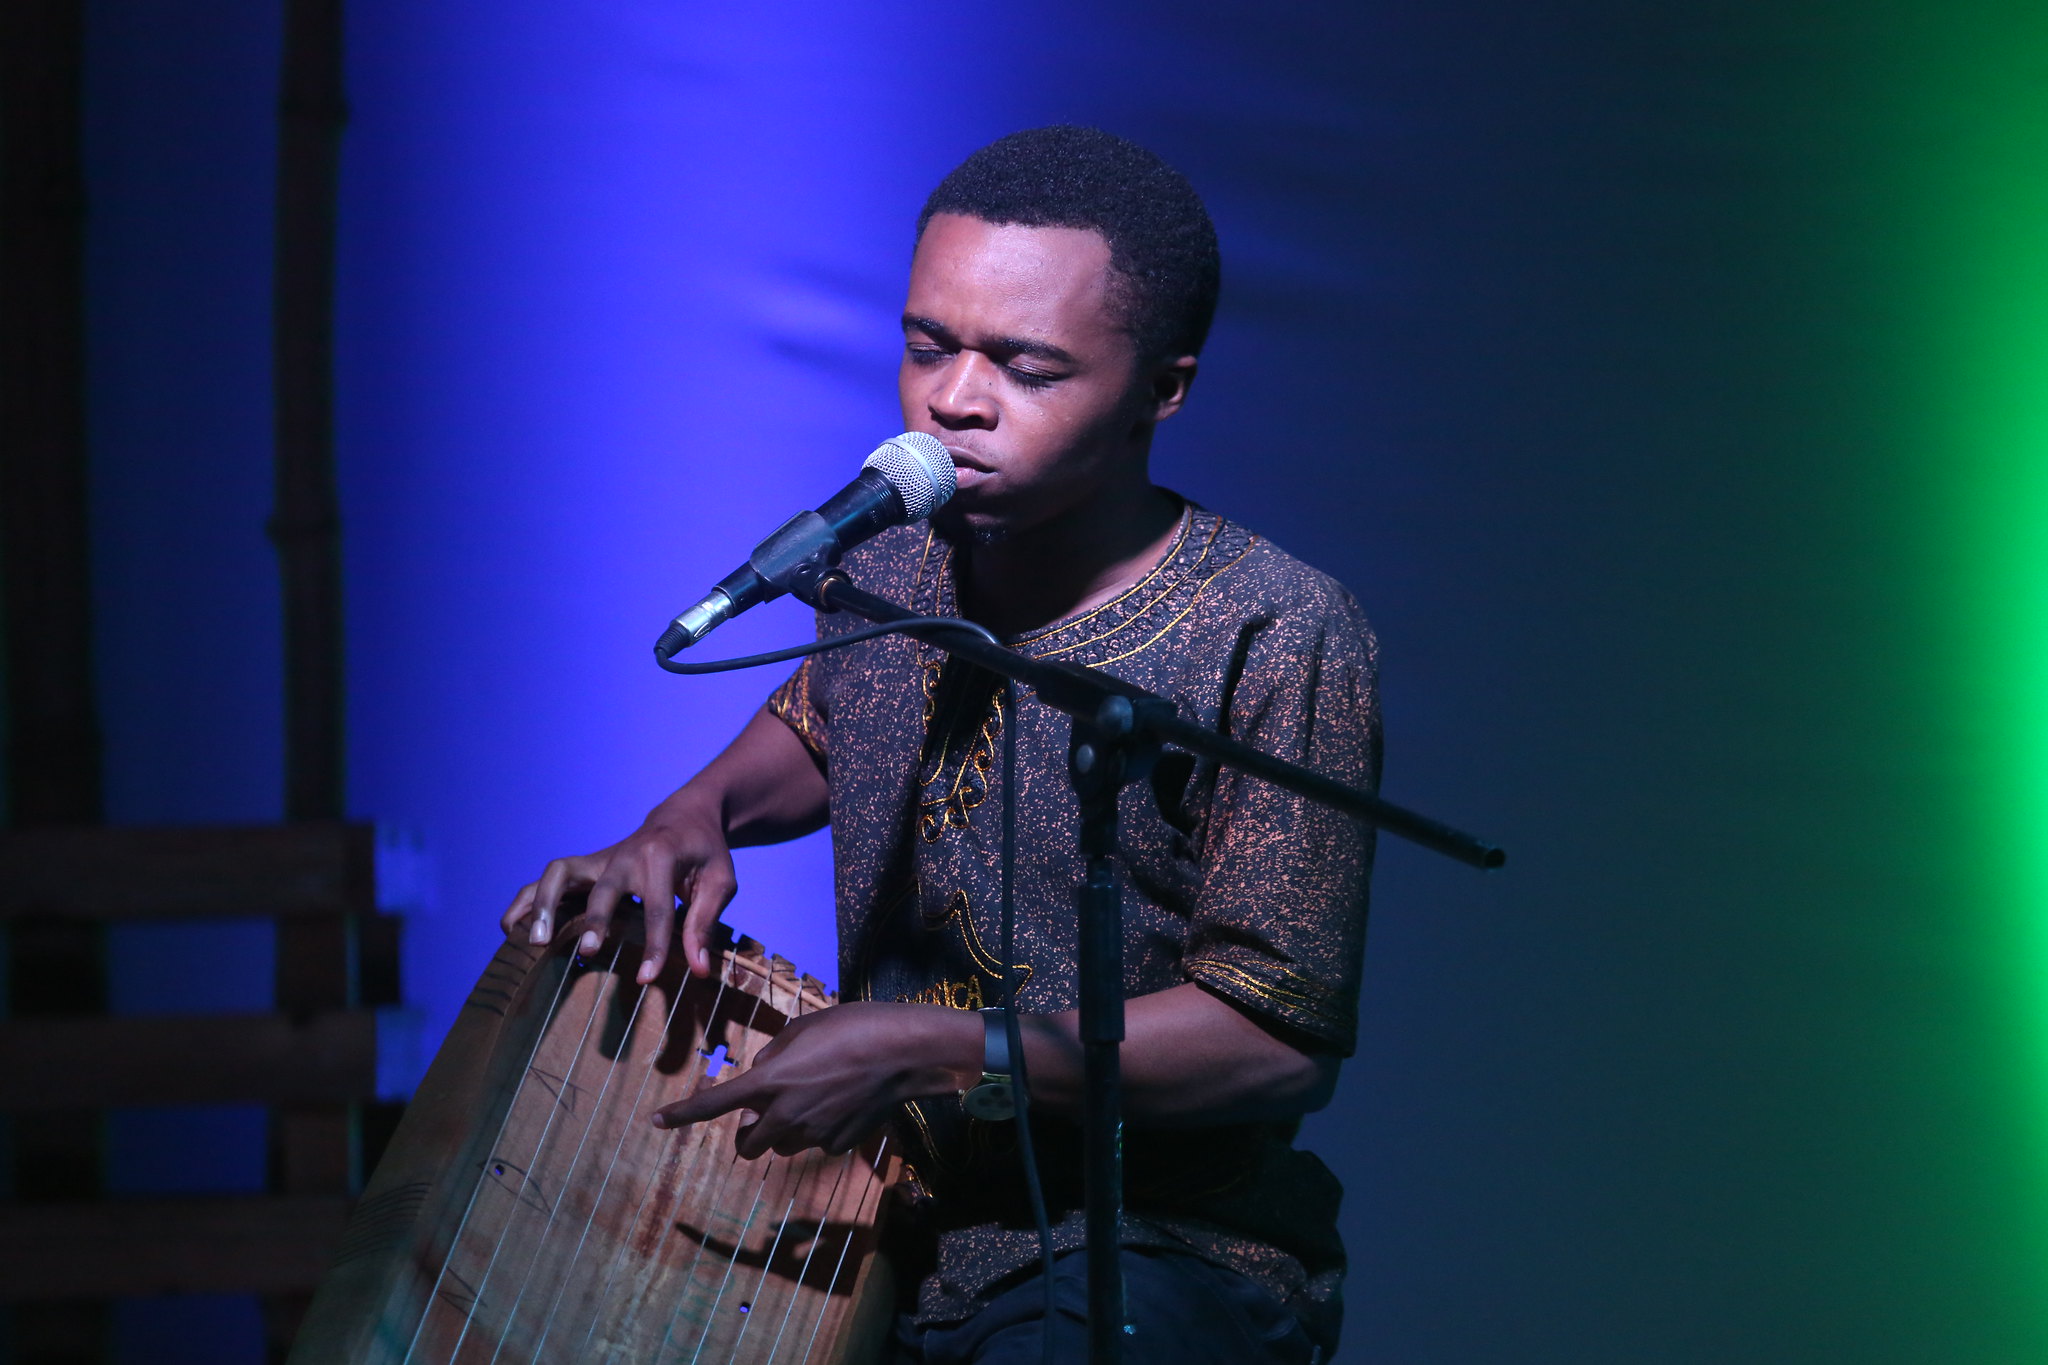 Deo Munyakazi, Inanga player and singer , is one the young artistes bringing traditional music back to life.